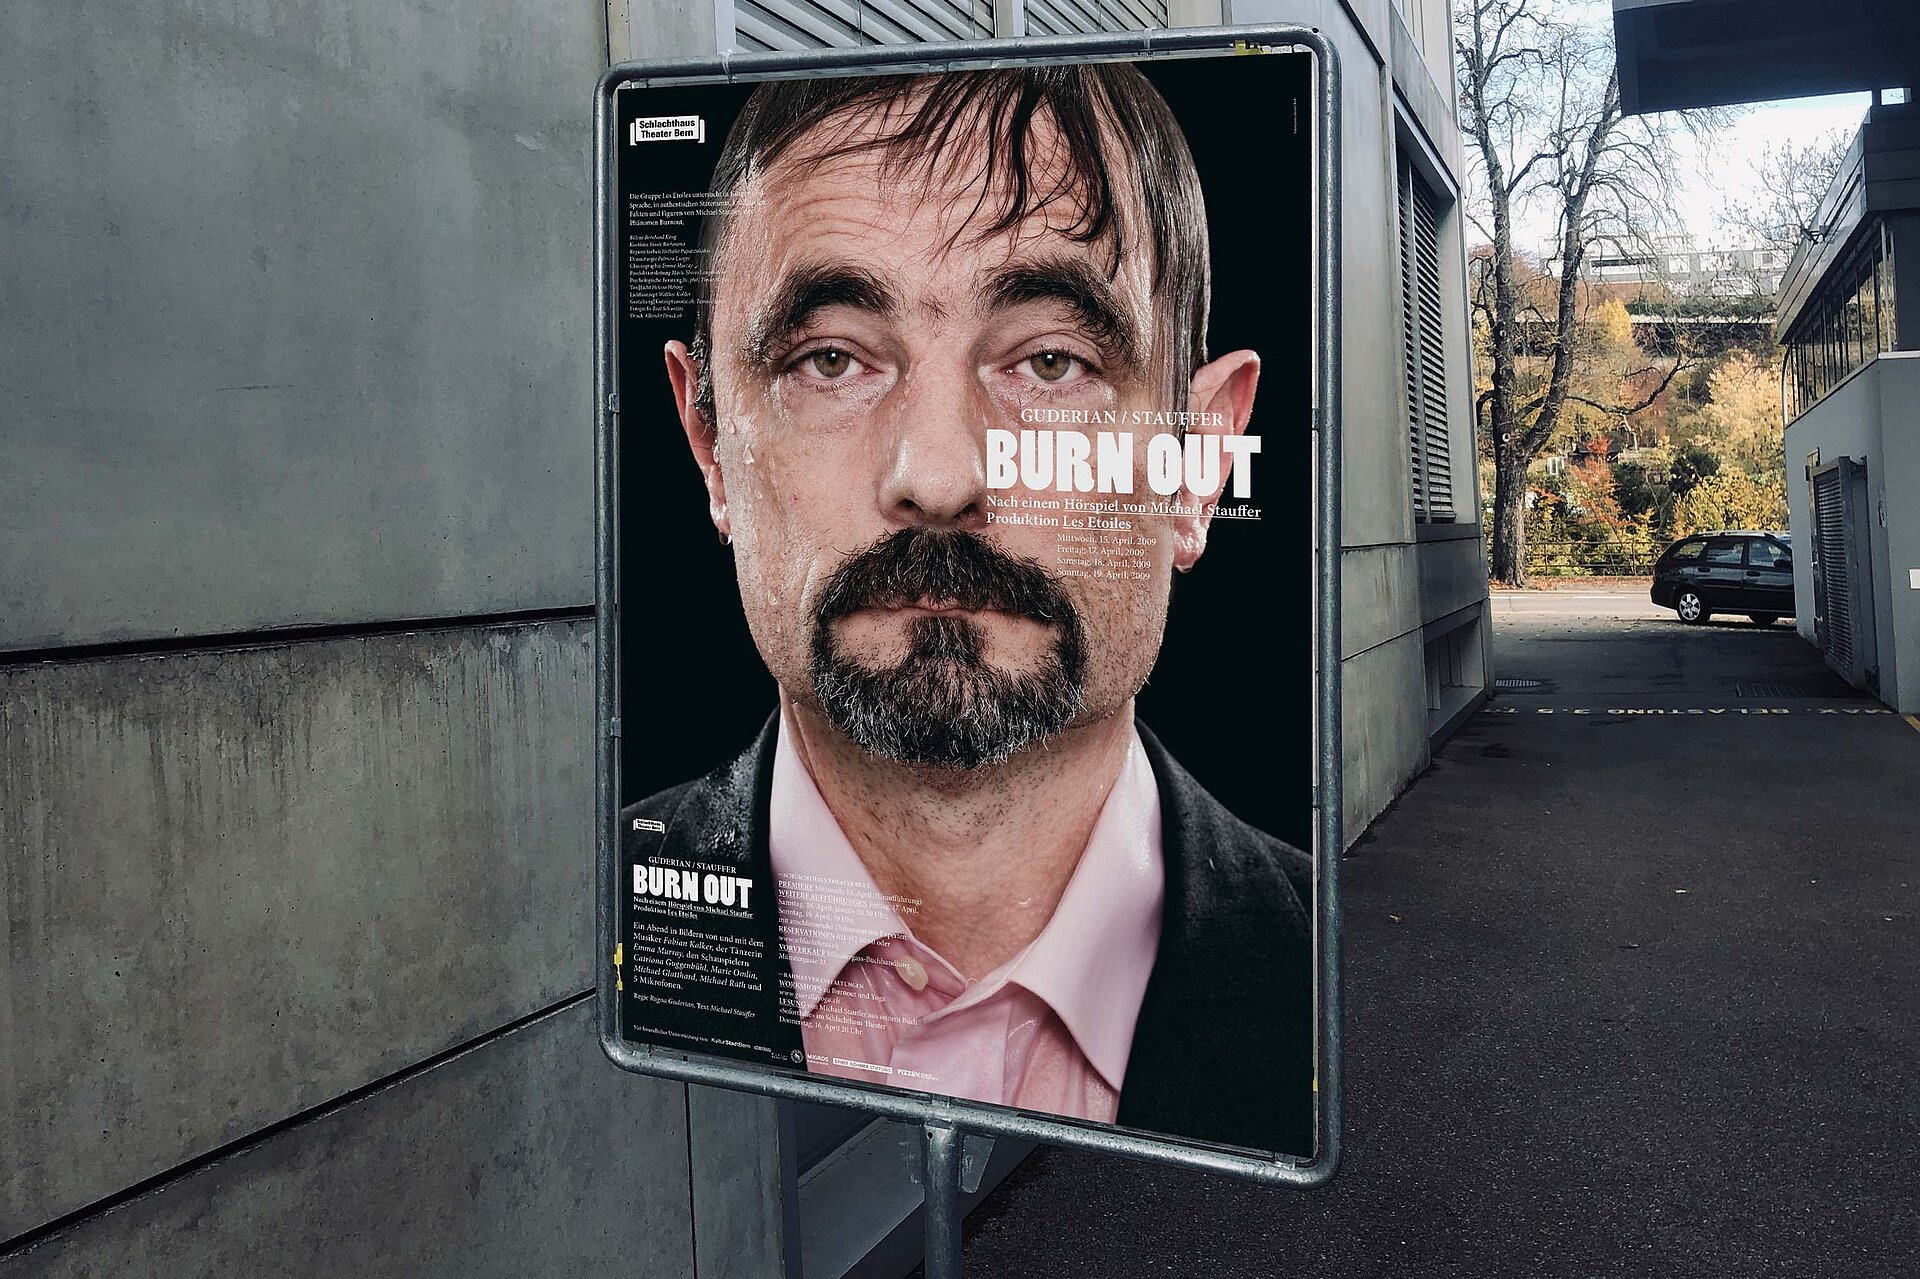 poster mockup guy with mustage advertising bern